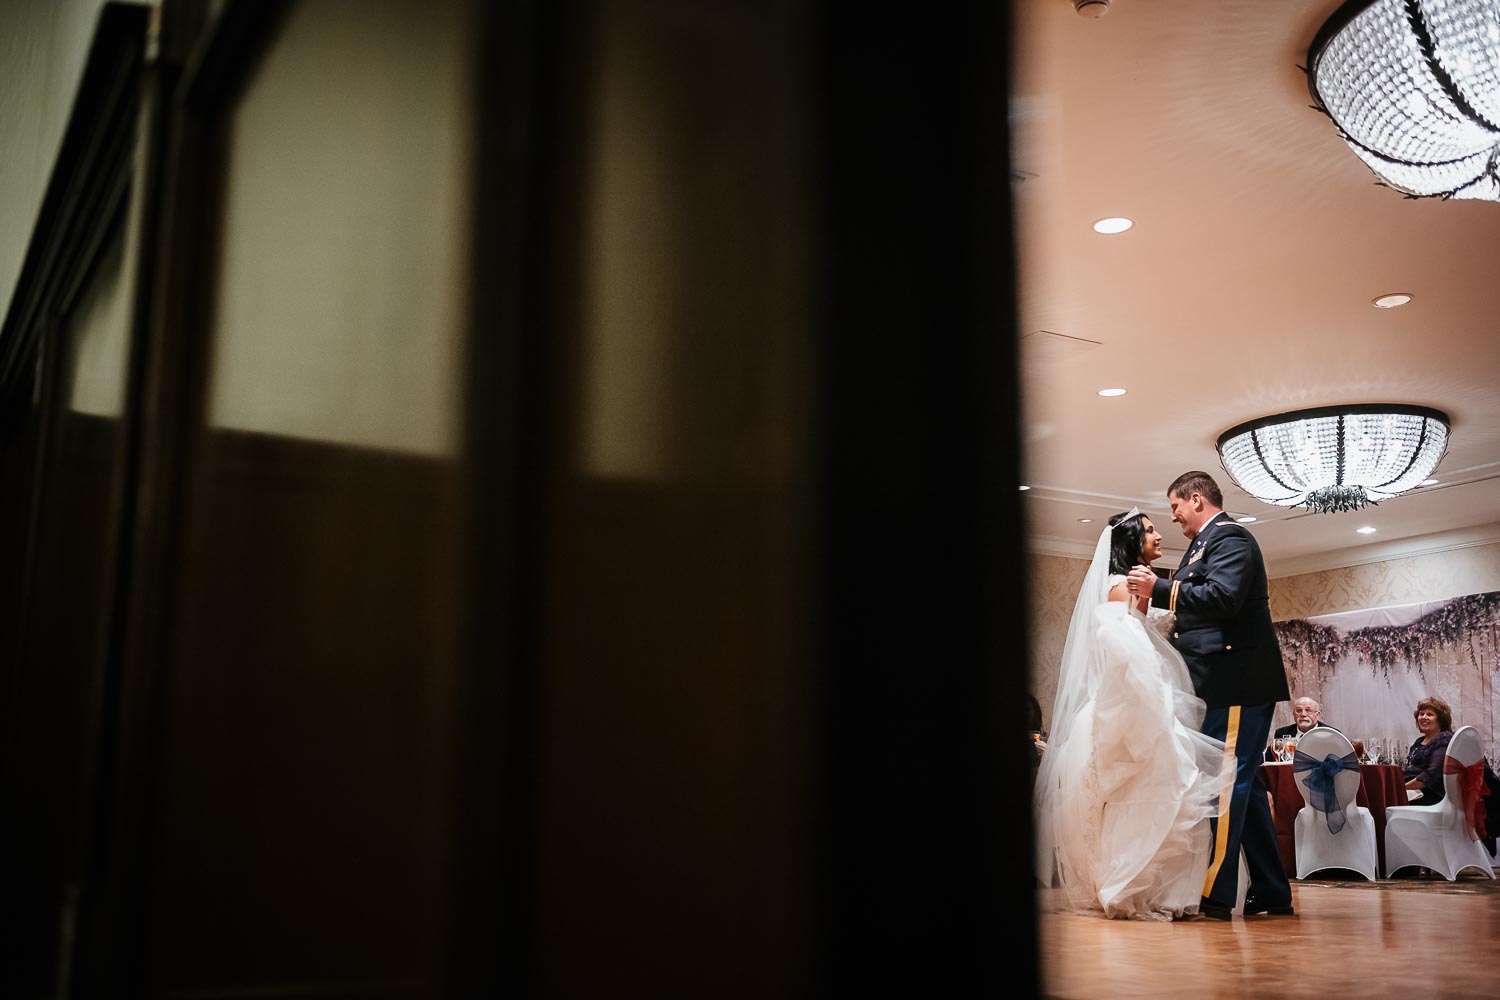 The couples first dance photographed through the reception doors